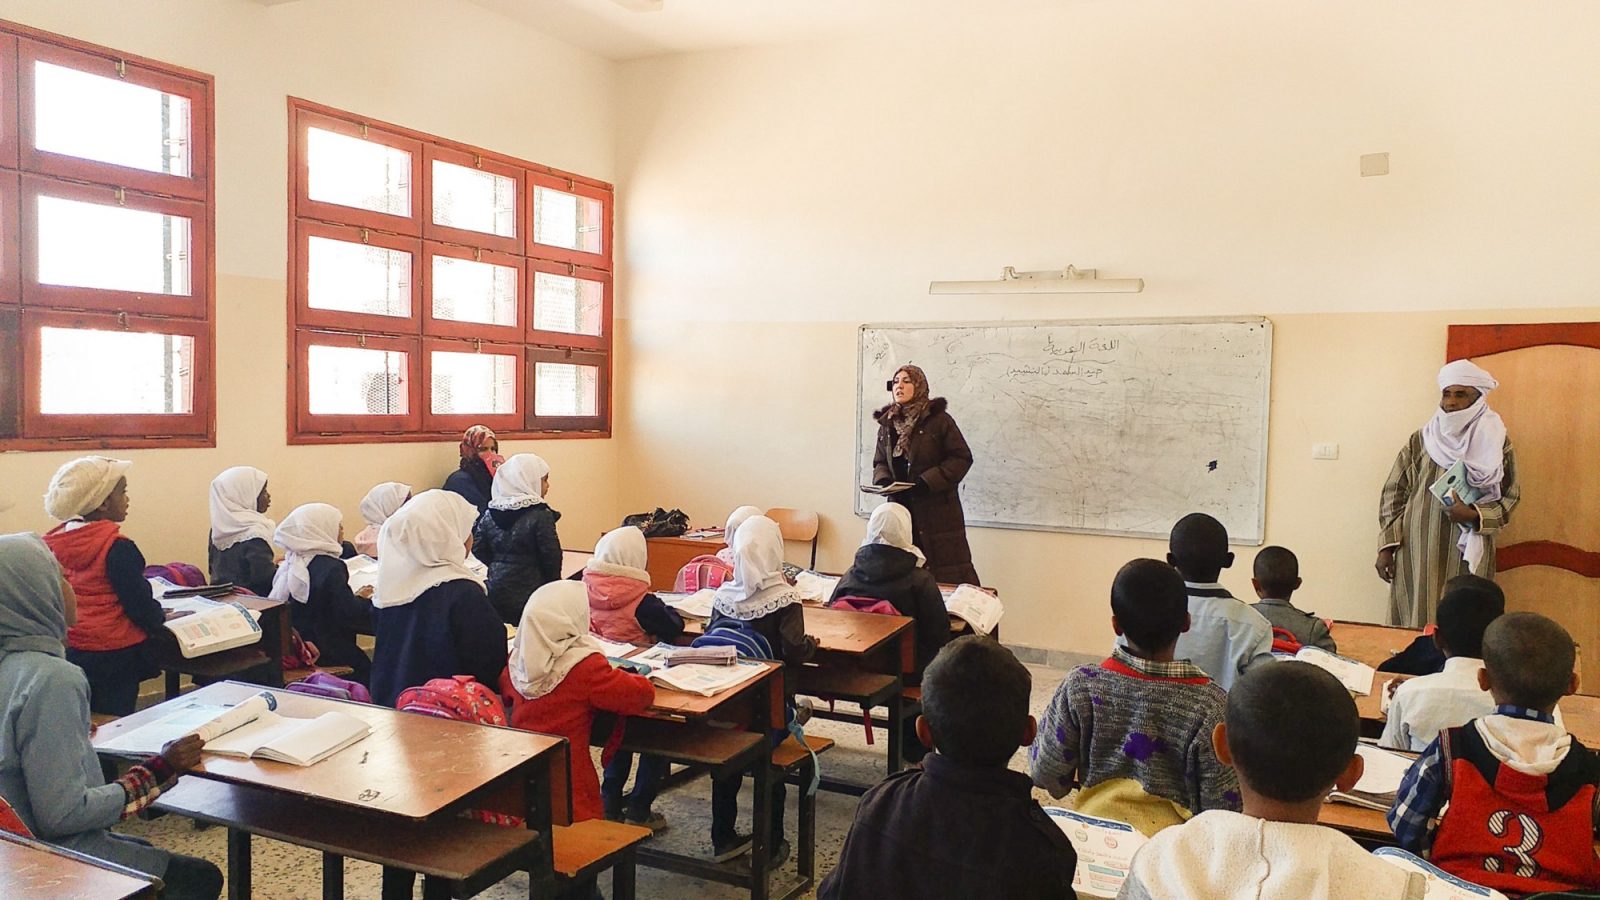 A class is in session at a school recently renovated by the Stabilization Facility for Libya.Photos by Ali Alshareef/ ©UNDP Libya. Photos by Ali Alshareef/ ©UNDP Libya